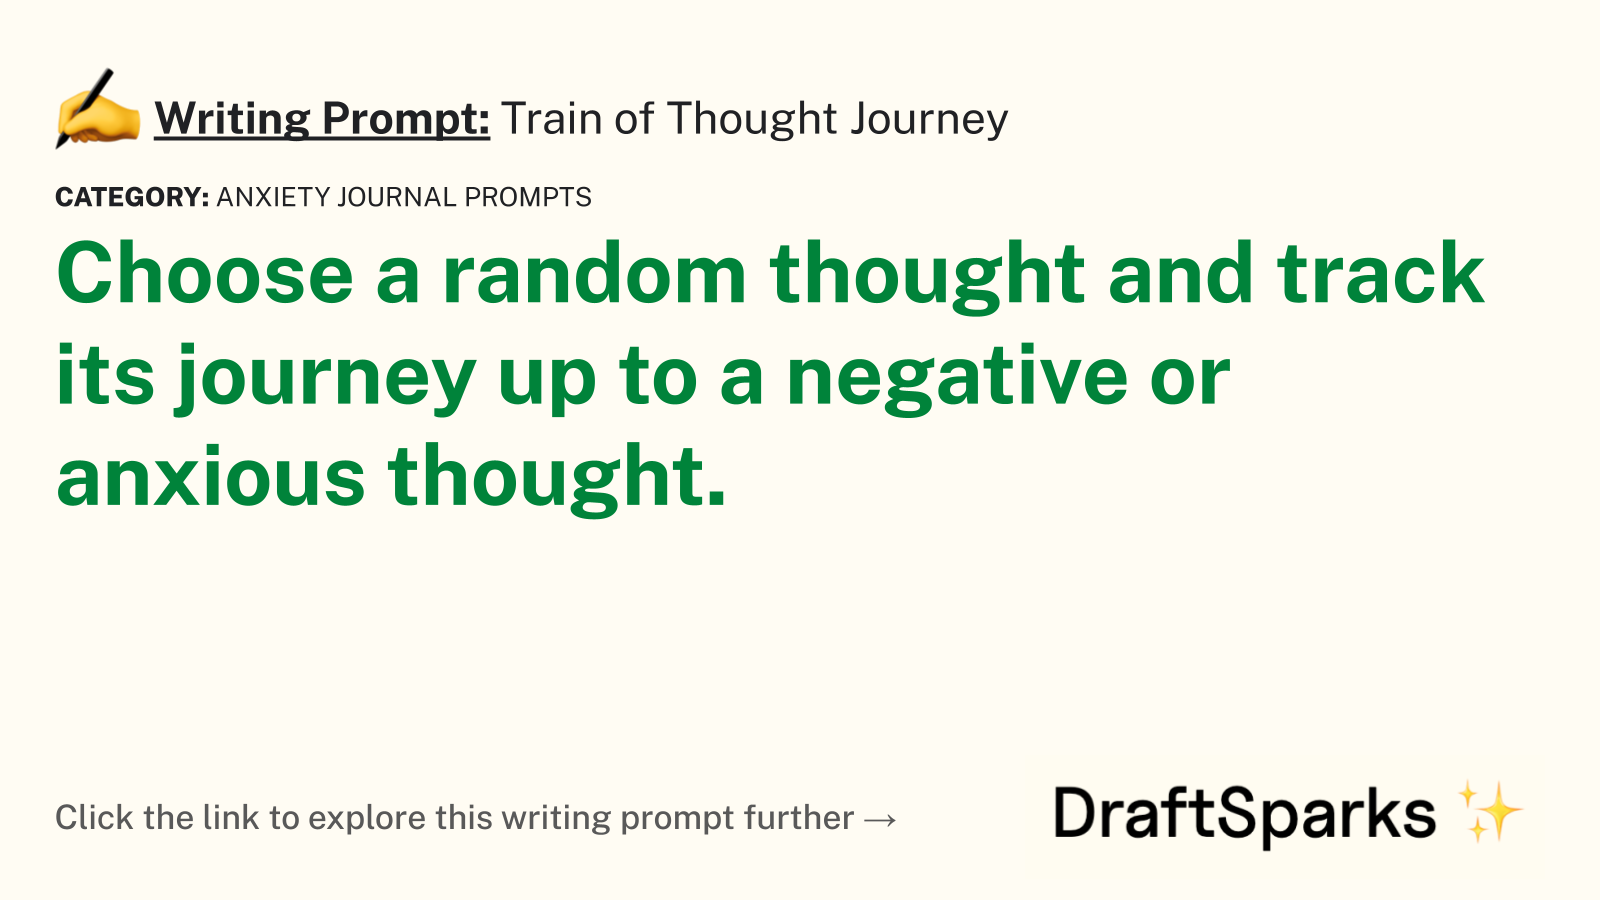 Train of Thought Journey